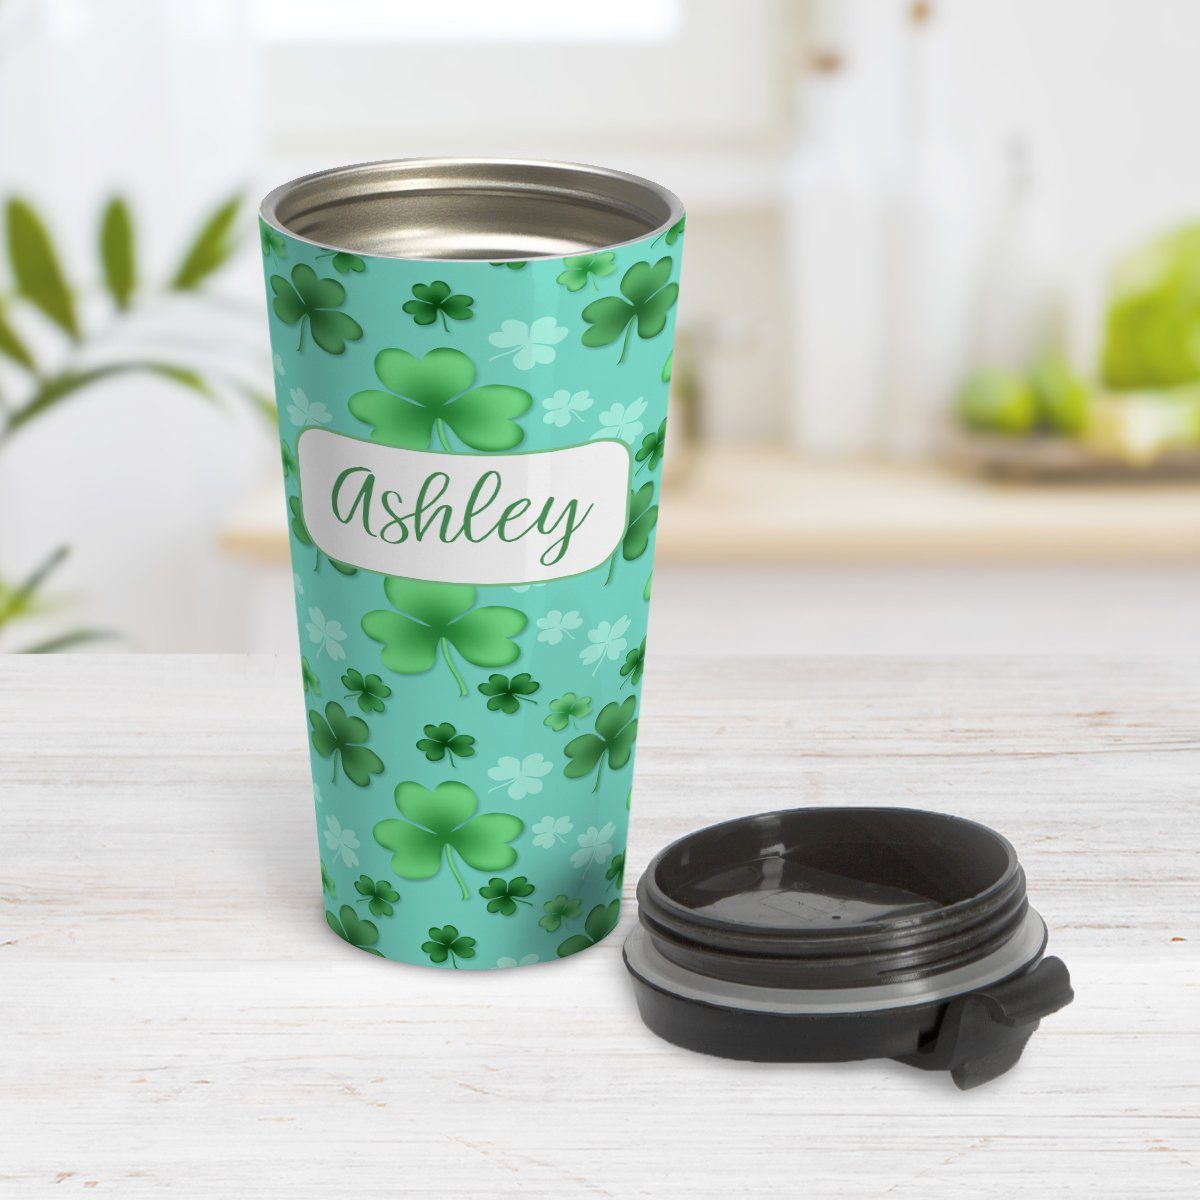 Personalized Lucky Clover Pattern Teal and Green Travel Mug at Amy's Coffee Mugs. A travel mug designed with a lucky green clover pattern with a 4-leaf clover among 3-leaf clovers, in different shades of green, over a teal background that wraps around the mug. Your name is personalized in green on white, over the lucky clover pattern.